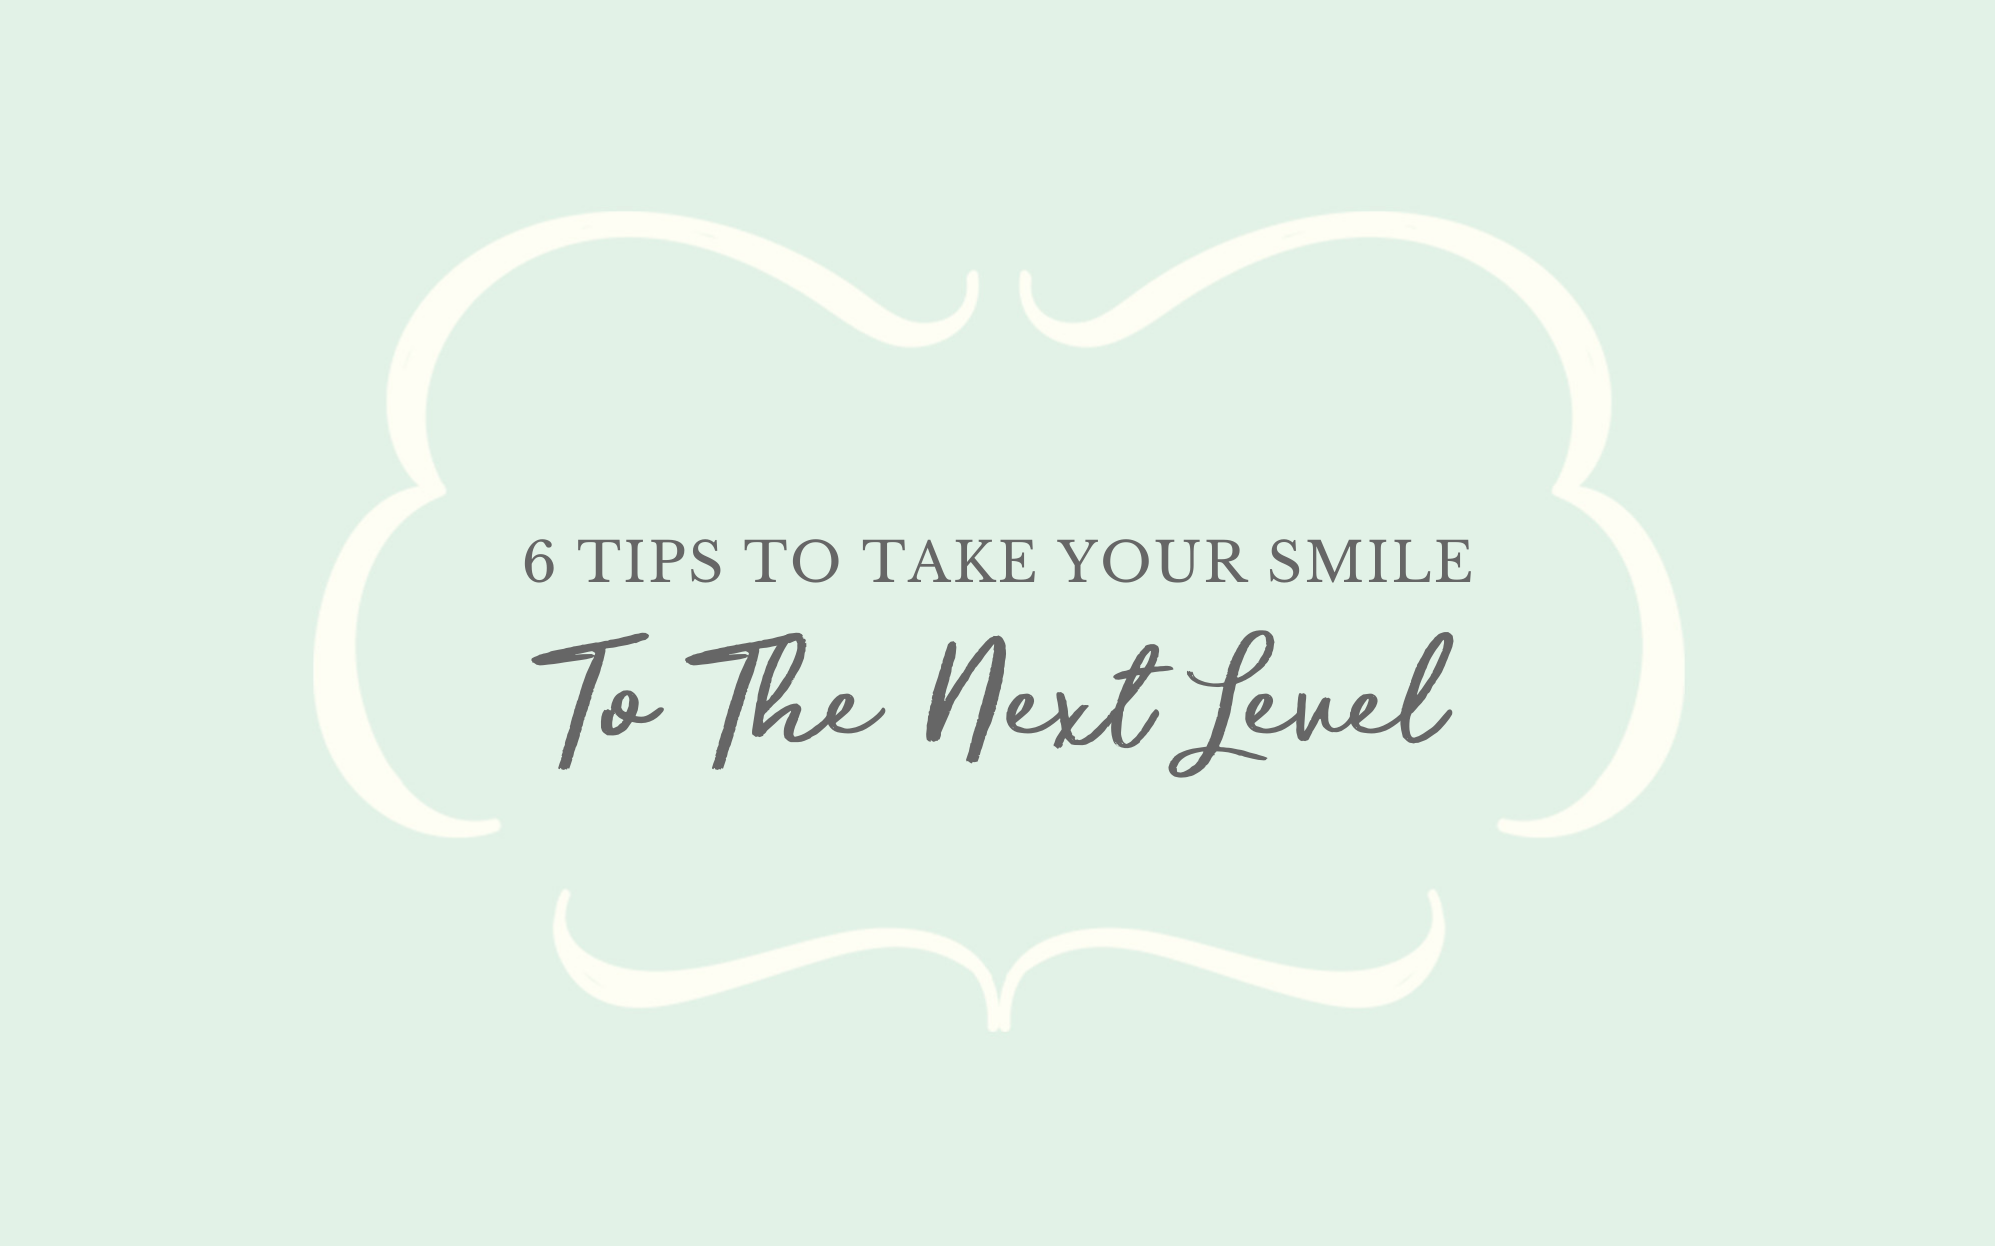 Take Your Smile to the Next Level